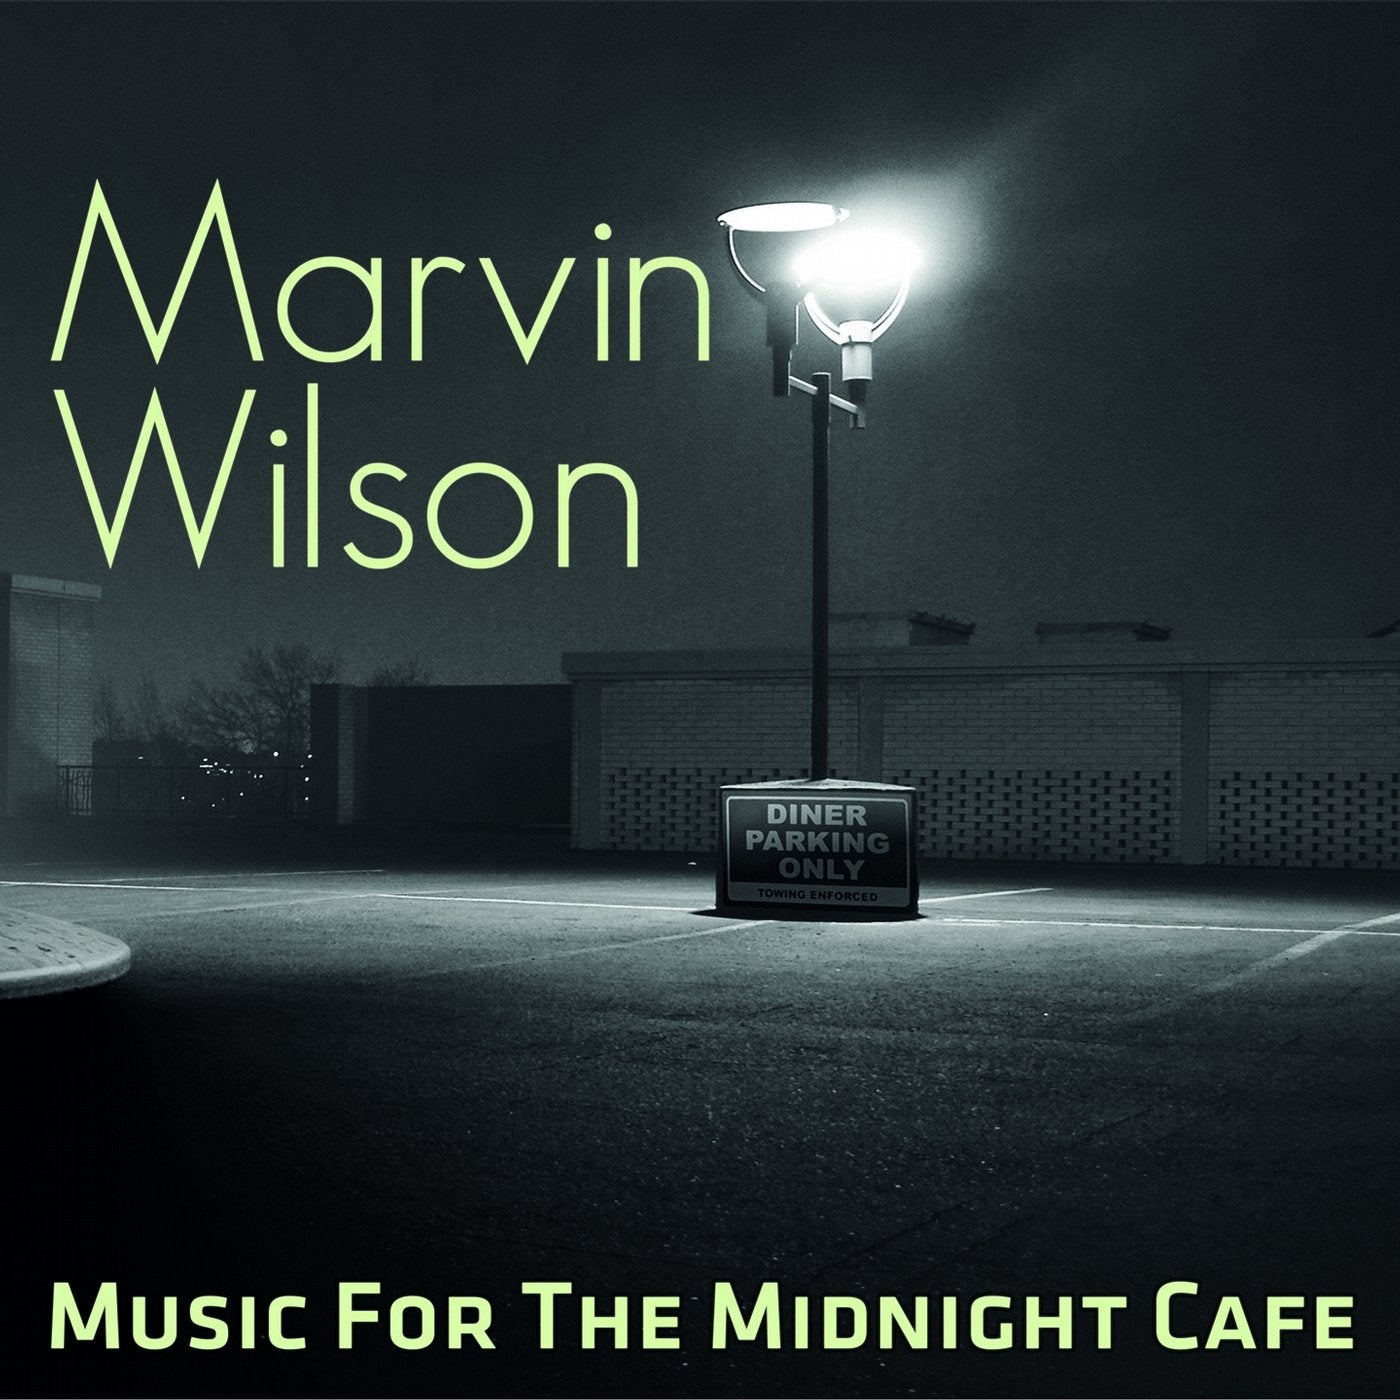 Music for the Midnight Cafe